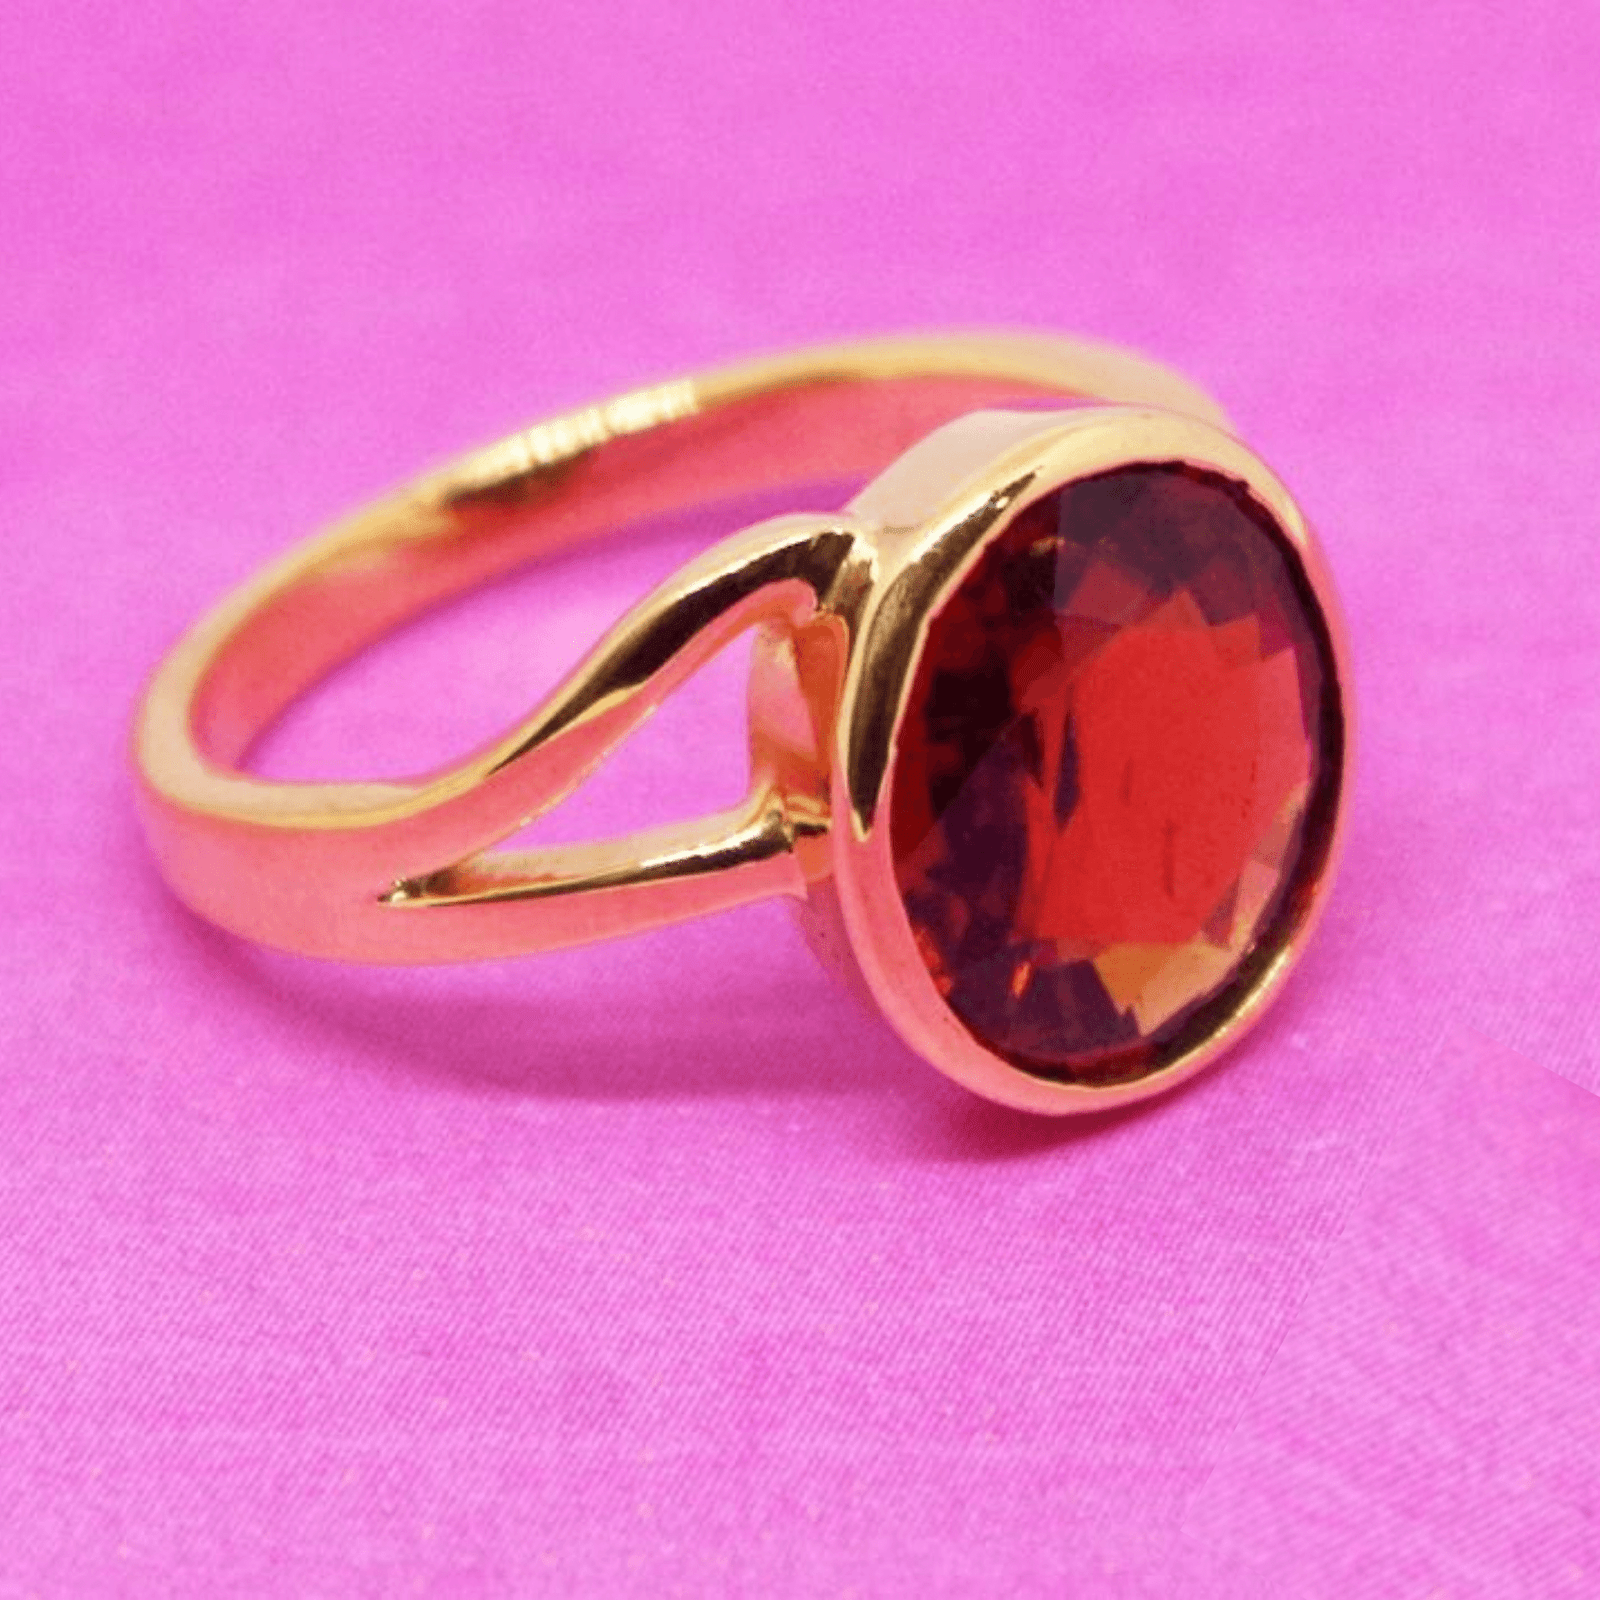 Buy Gomed Stone Ring Online In India - Etsy India